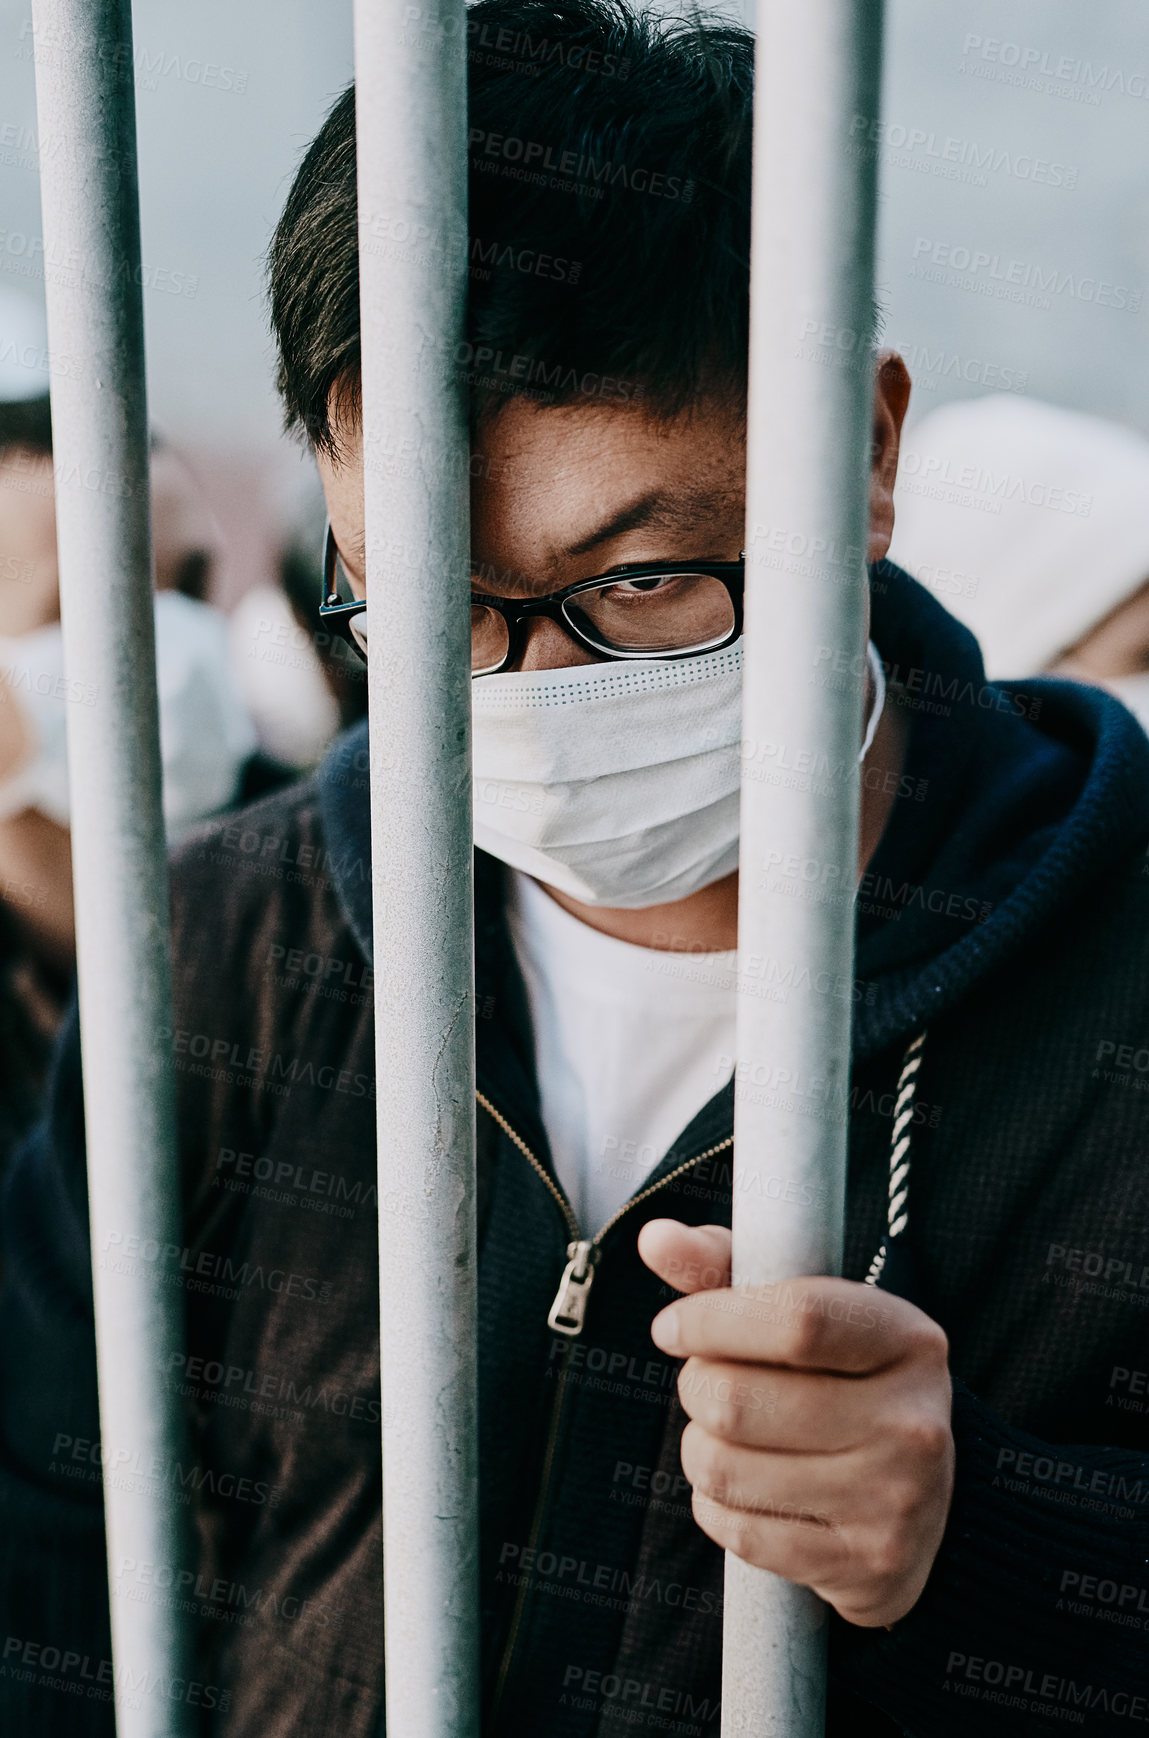 Buy stock photo Lockdown, isolation and covid travel ban with a man in a mask behind bars during an international pandemic. Corona virus restrictions, feeling like a prisoner or captive during a global shutdown